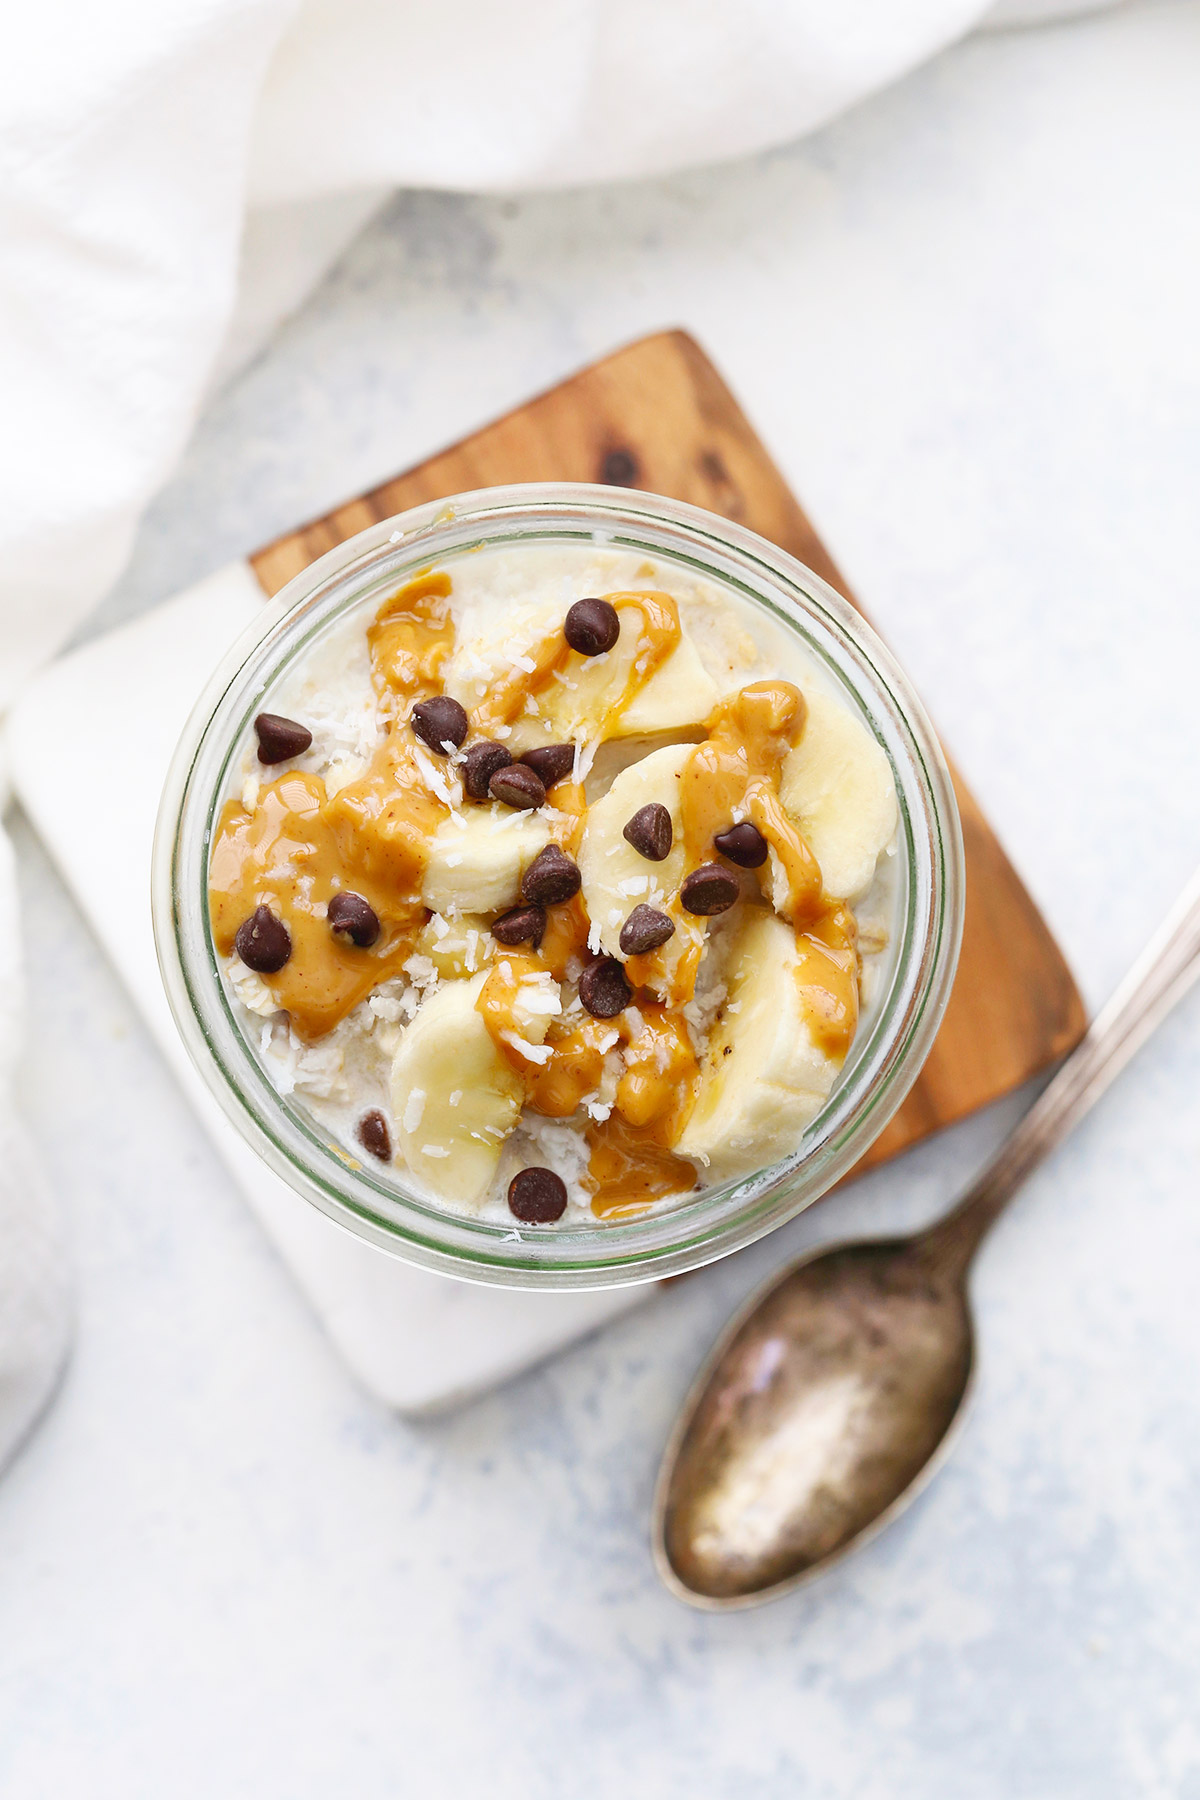 Chunky Monkey Overnight Oats from One Lovely Life